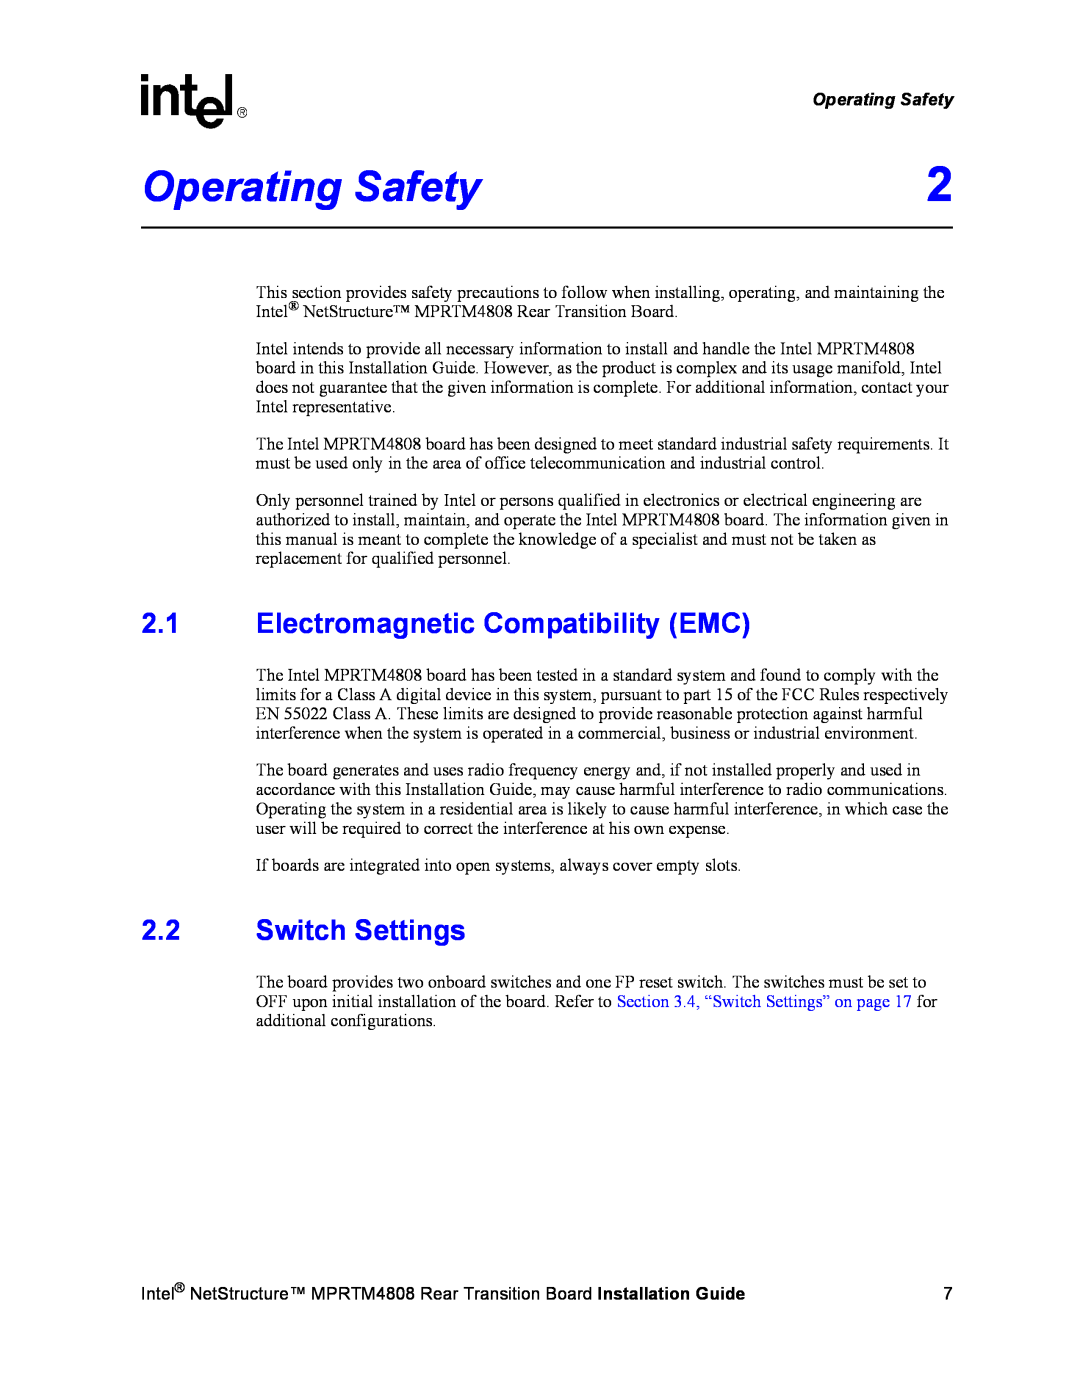 Intel MPRTM4808 manual Operating Safety, 2.1Electromagnetic Compatibility EMC, 2.2Switch Settings 